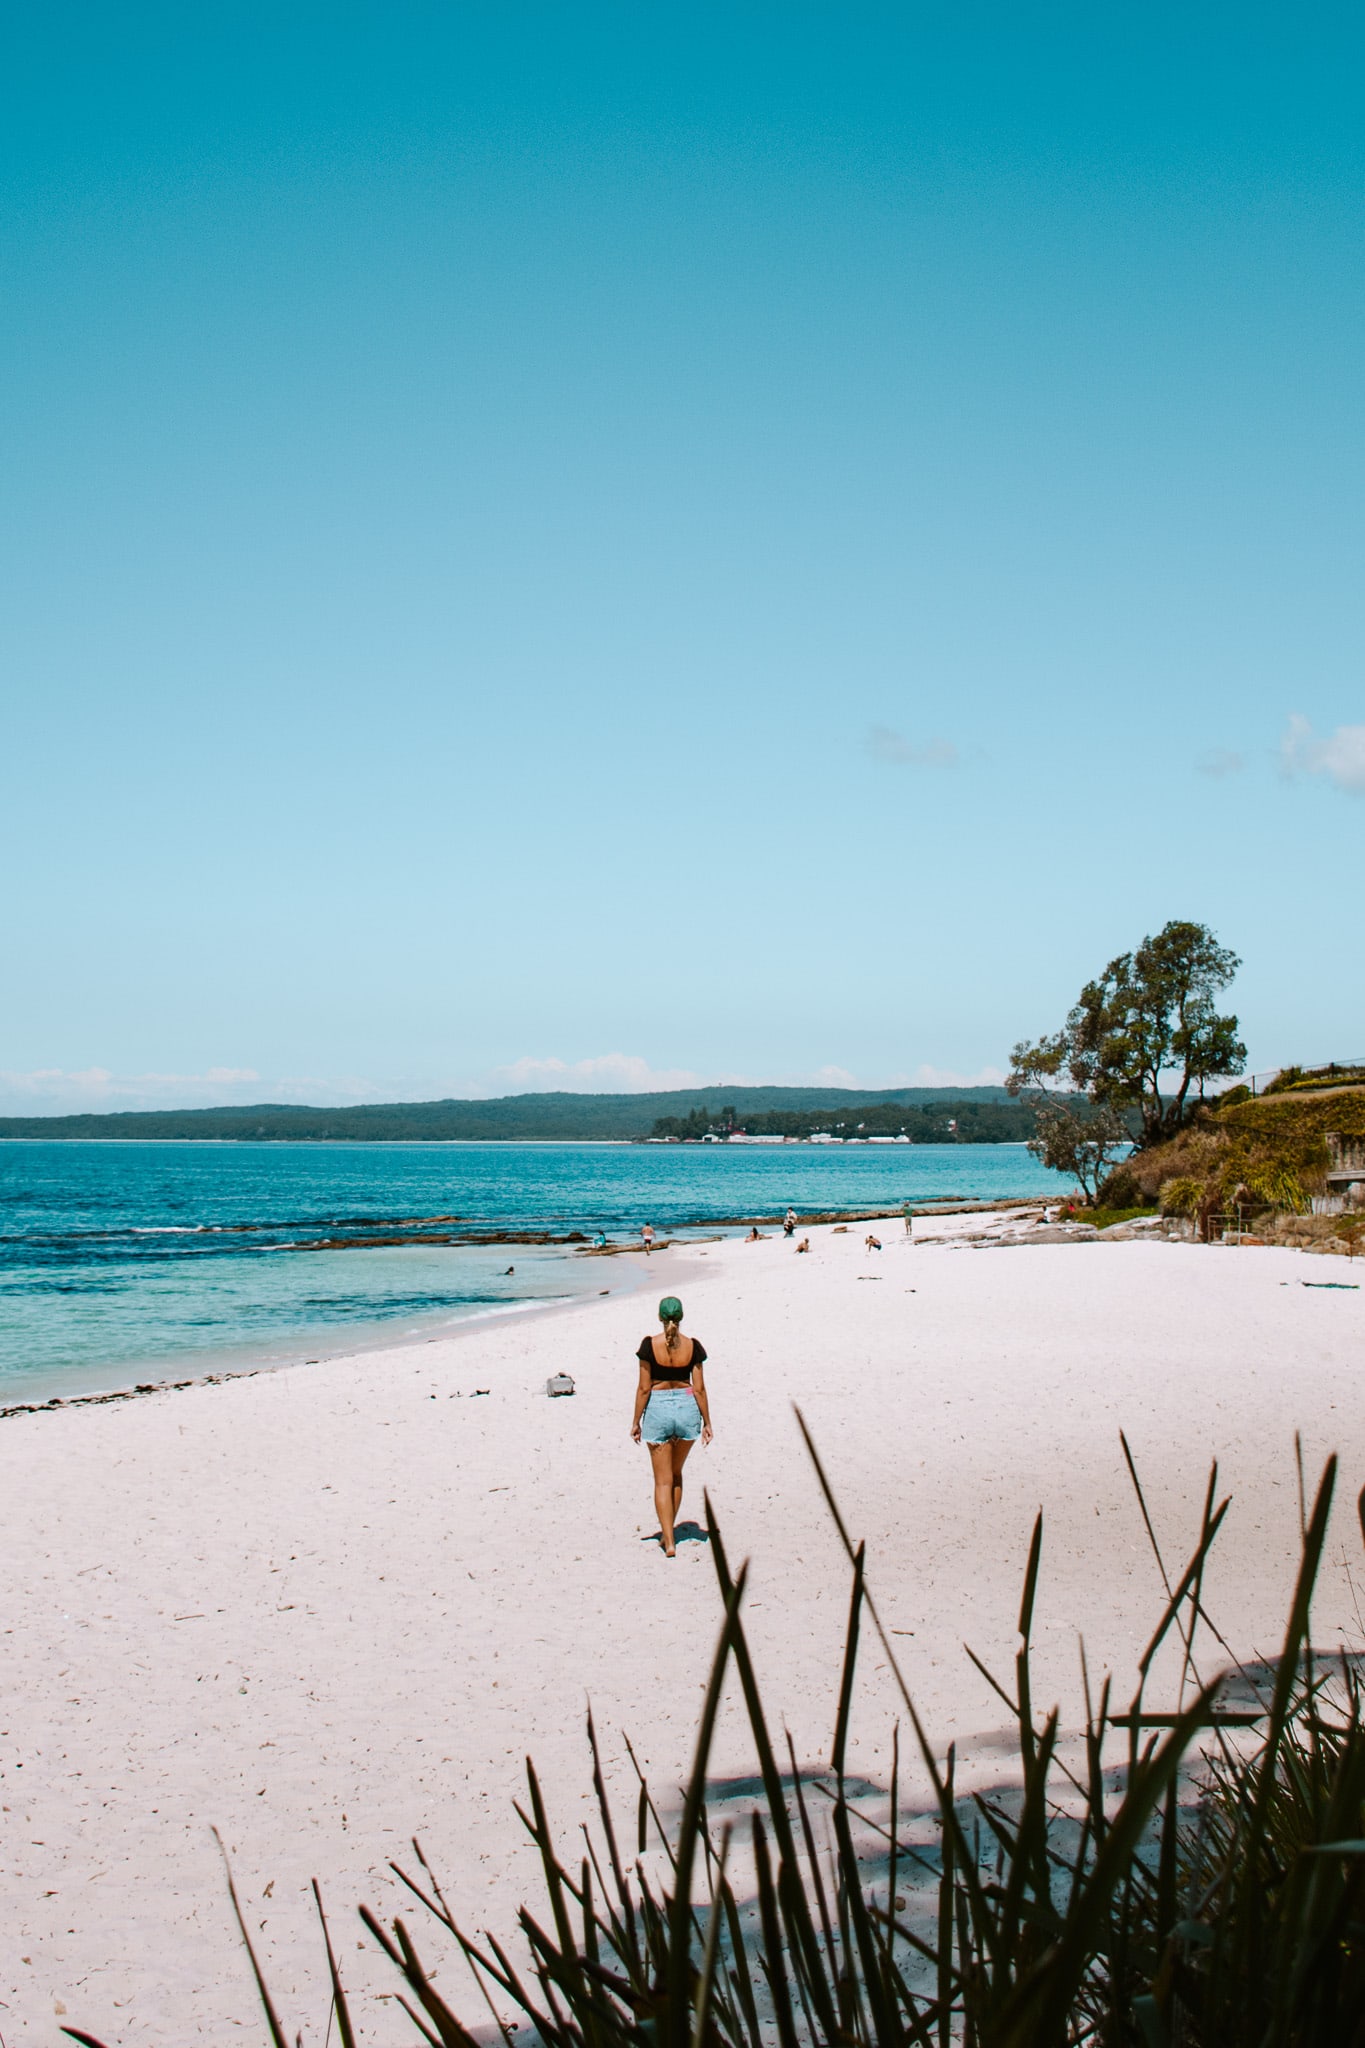 Australia Campervan Road Trip: 11 Best Places and Beaches From Sydney to Melbourne cairns